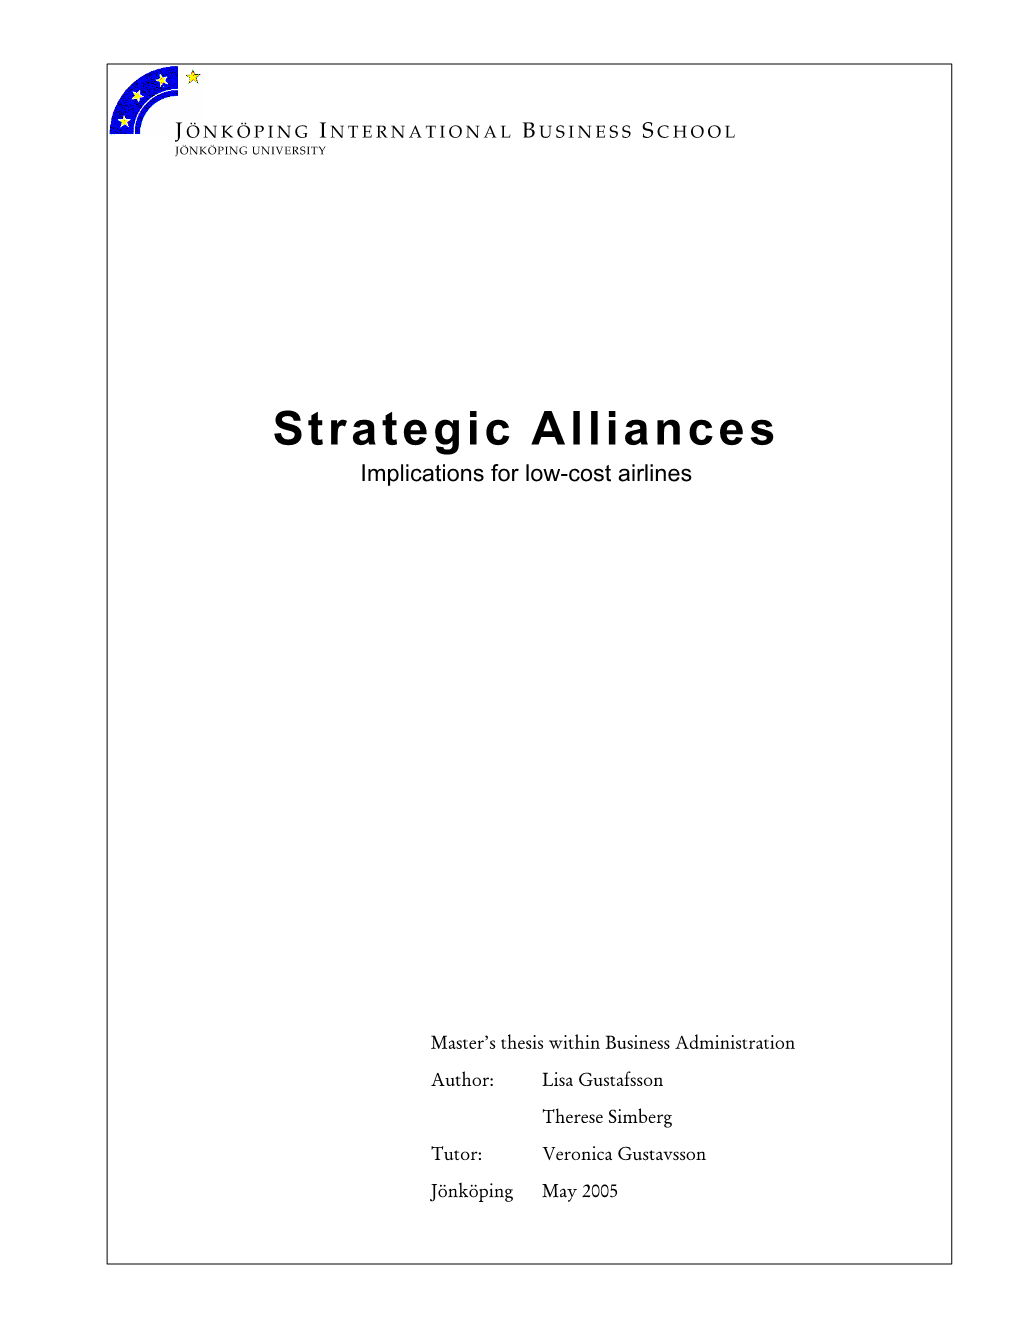 Strategic Alliances Implications for Low-Cost Airlines